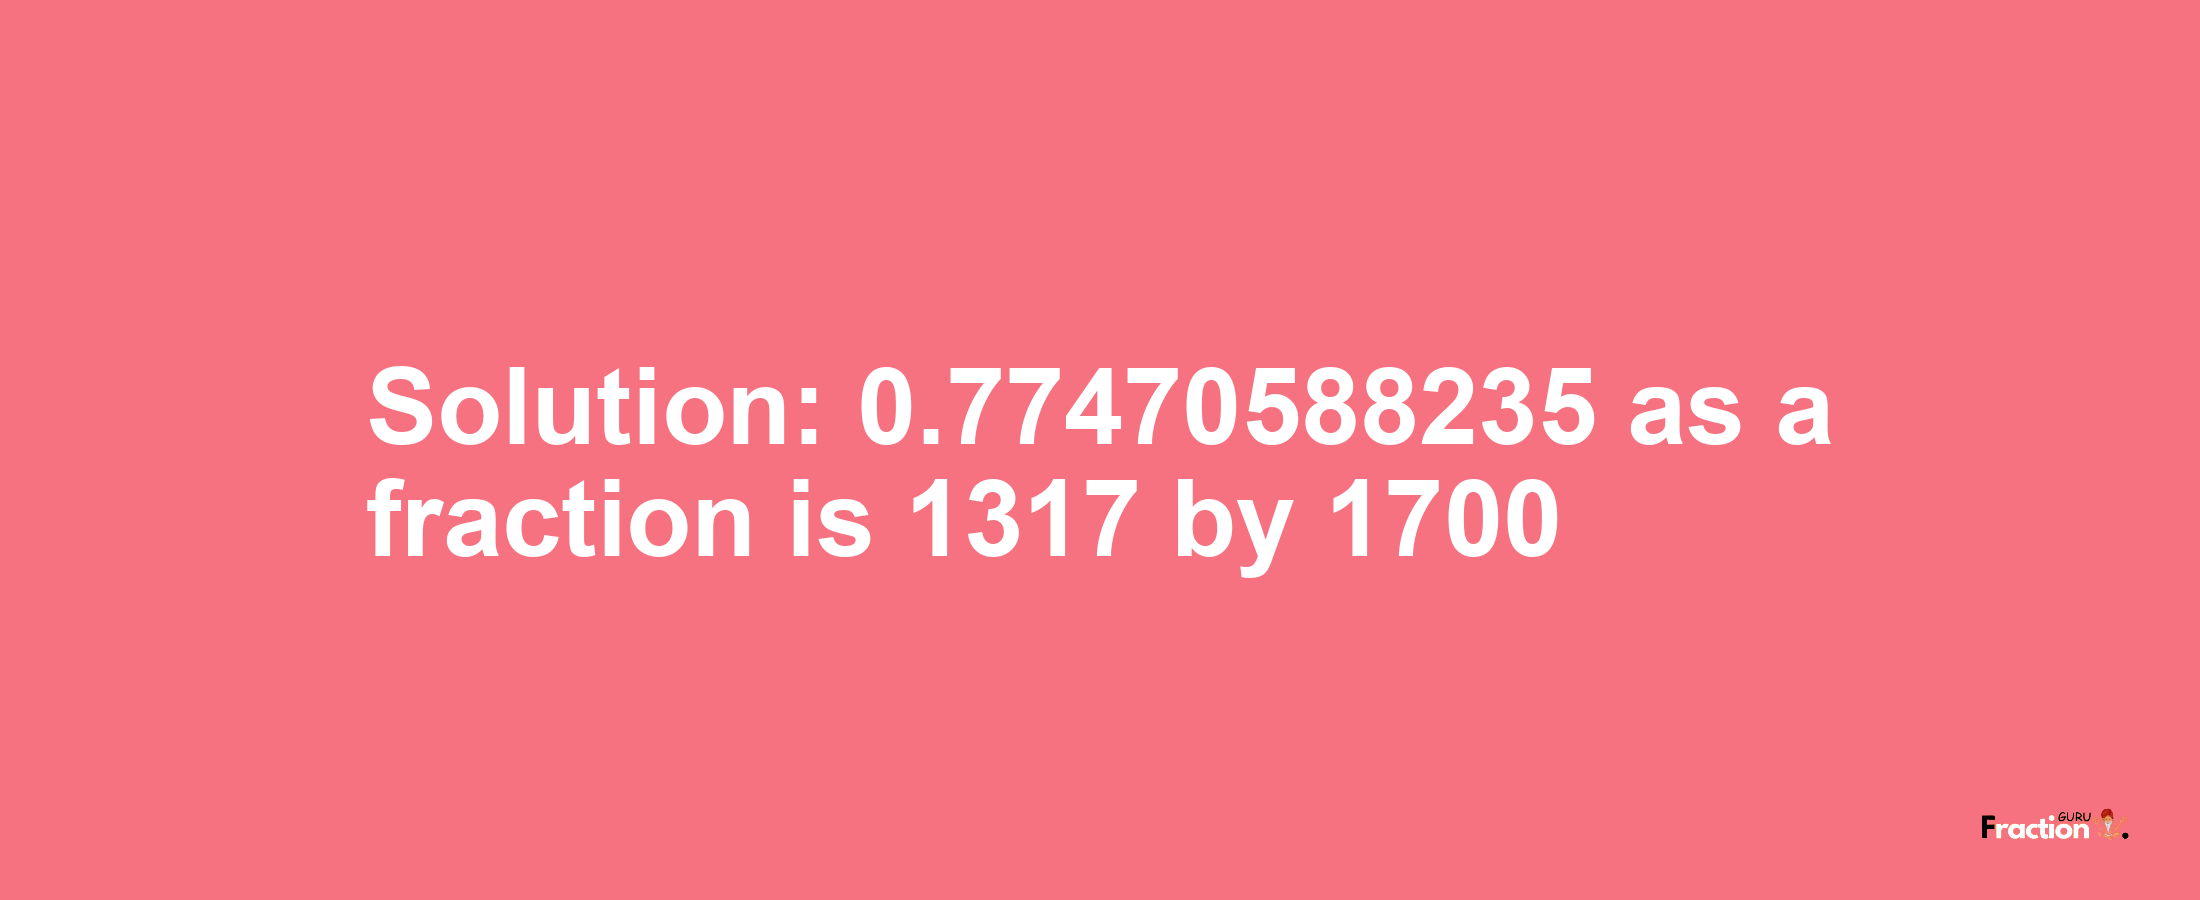 Solution:0.77470588235 as a fraction is 1317/1700